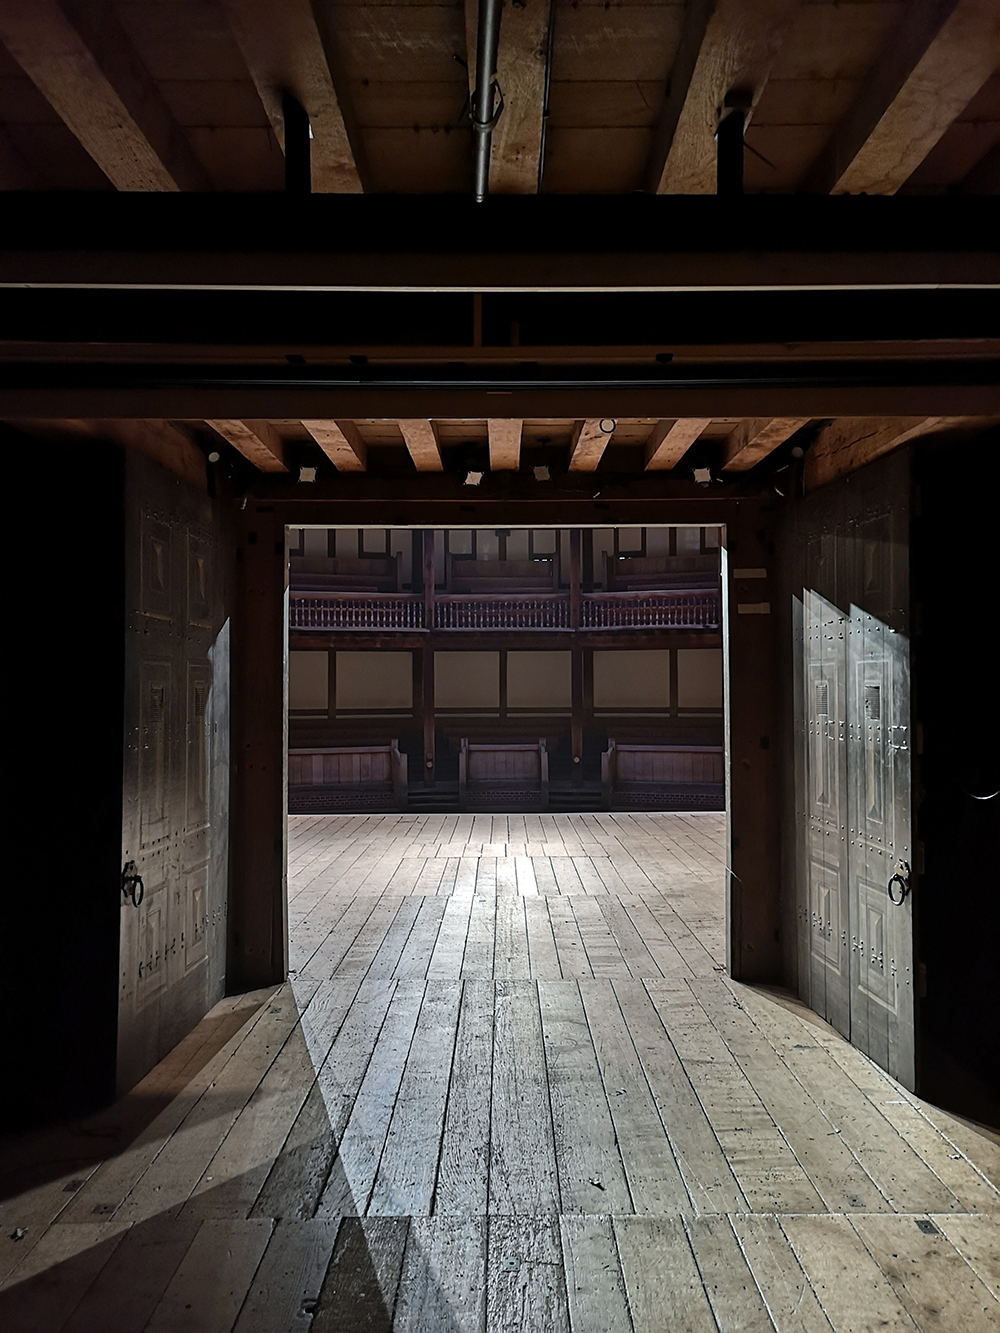 A view from backstage of the Globe Theatre, looking out through the open double oak doors on to the stage and the galleries beyond.